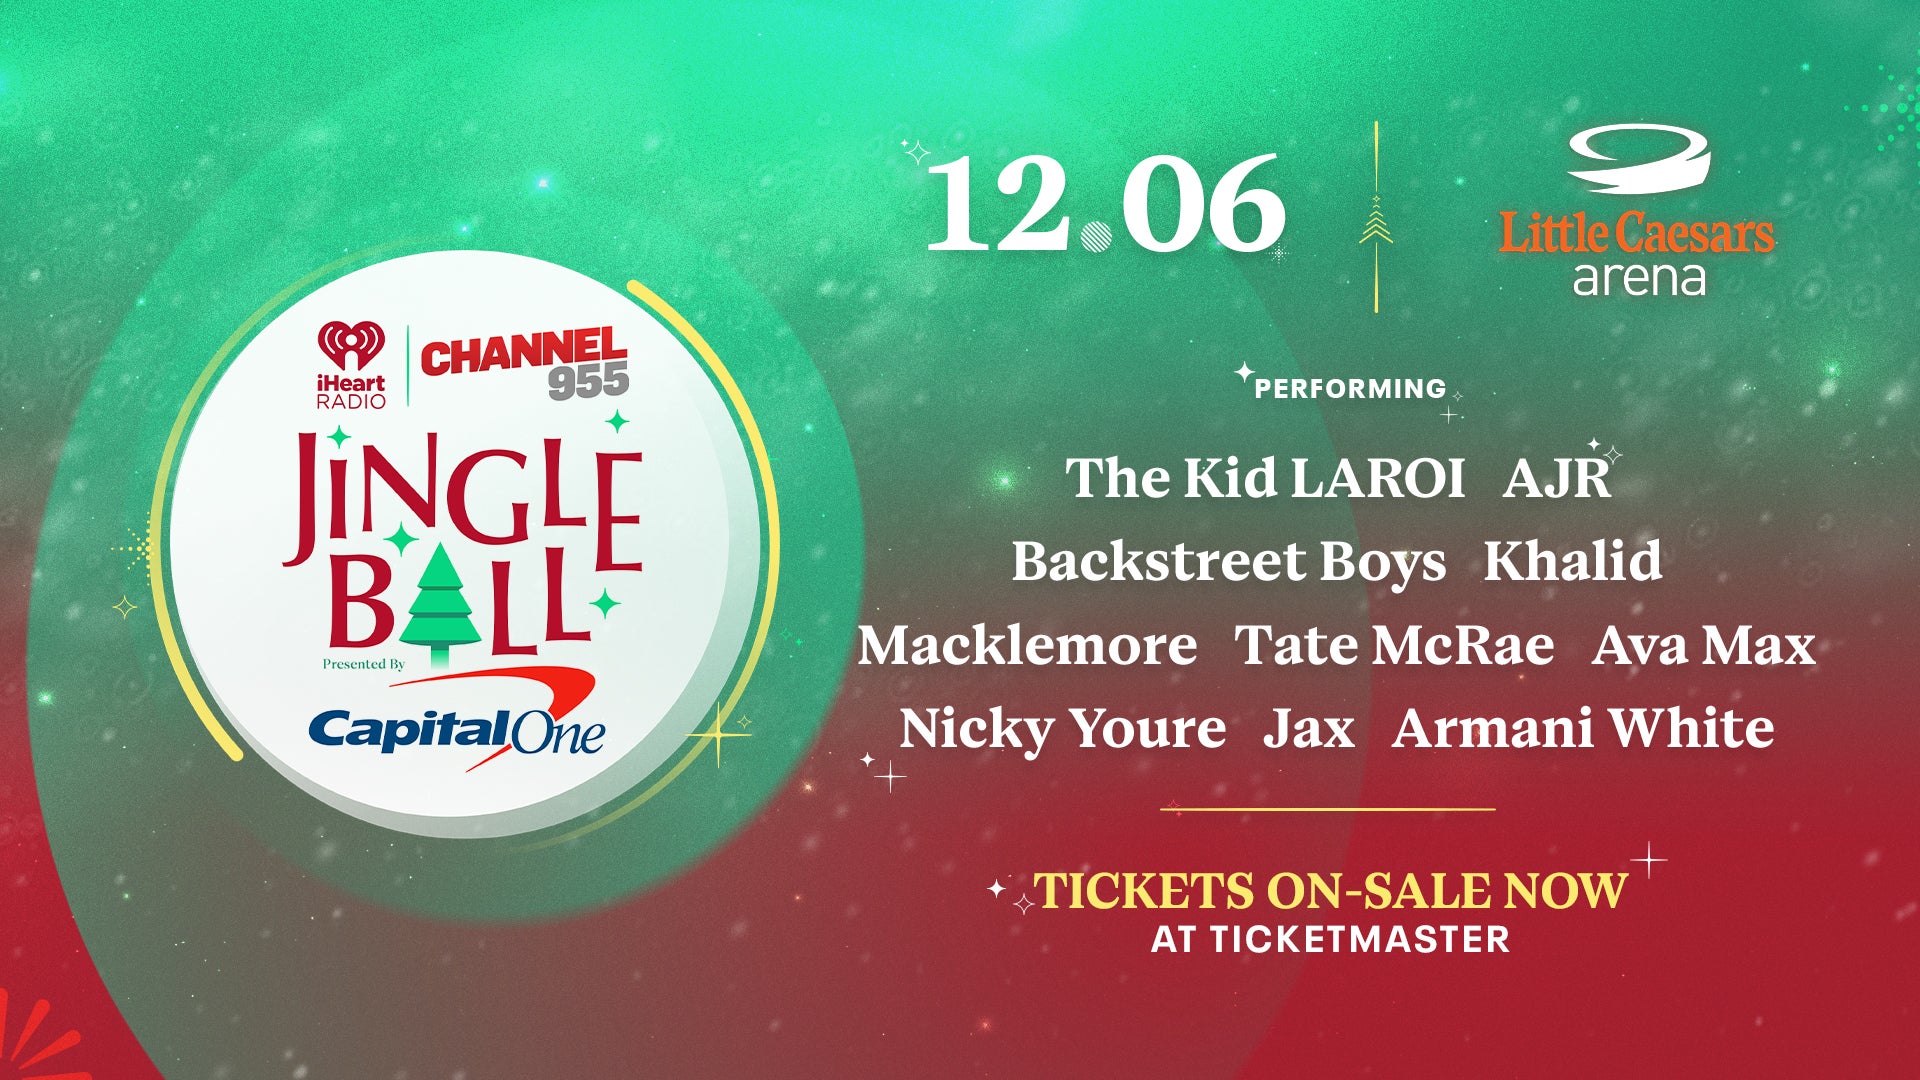 Channel 95.5’s Jingle Ball Presented by Capital One